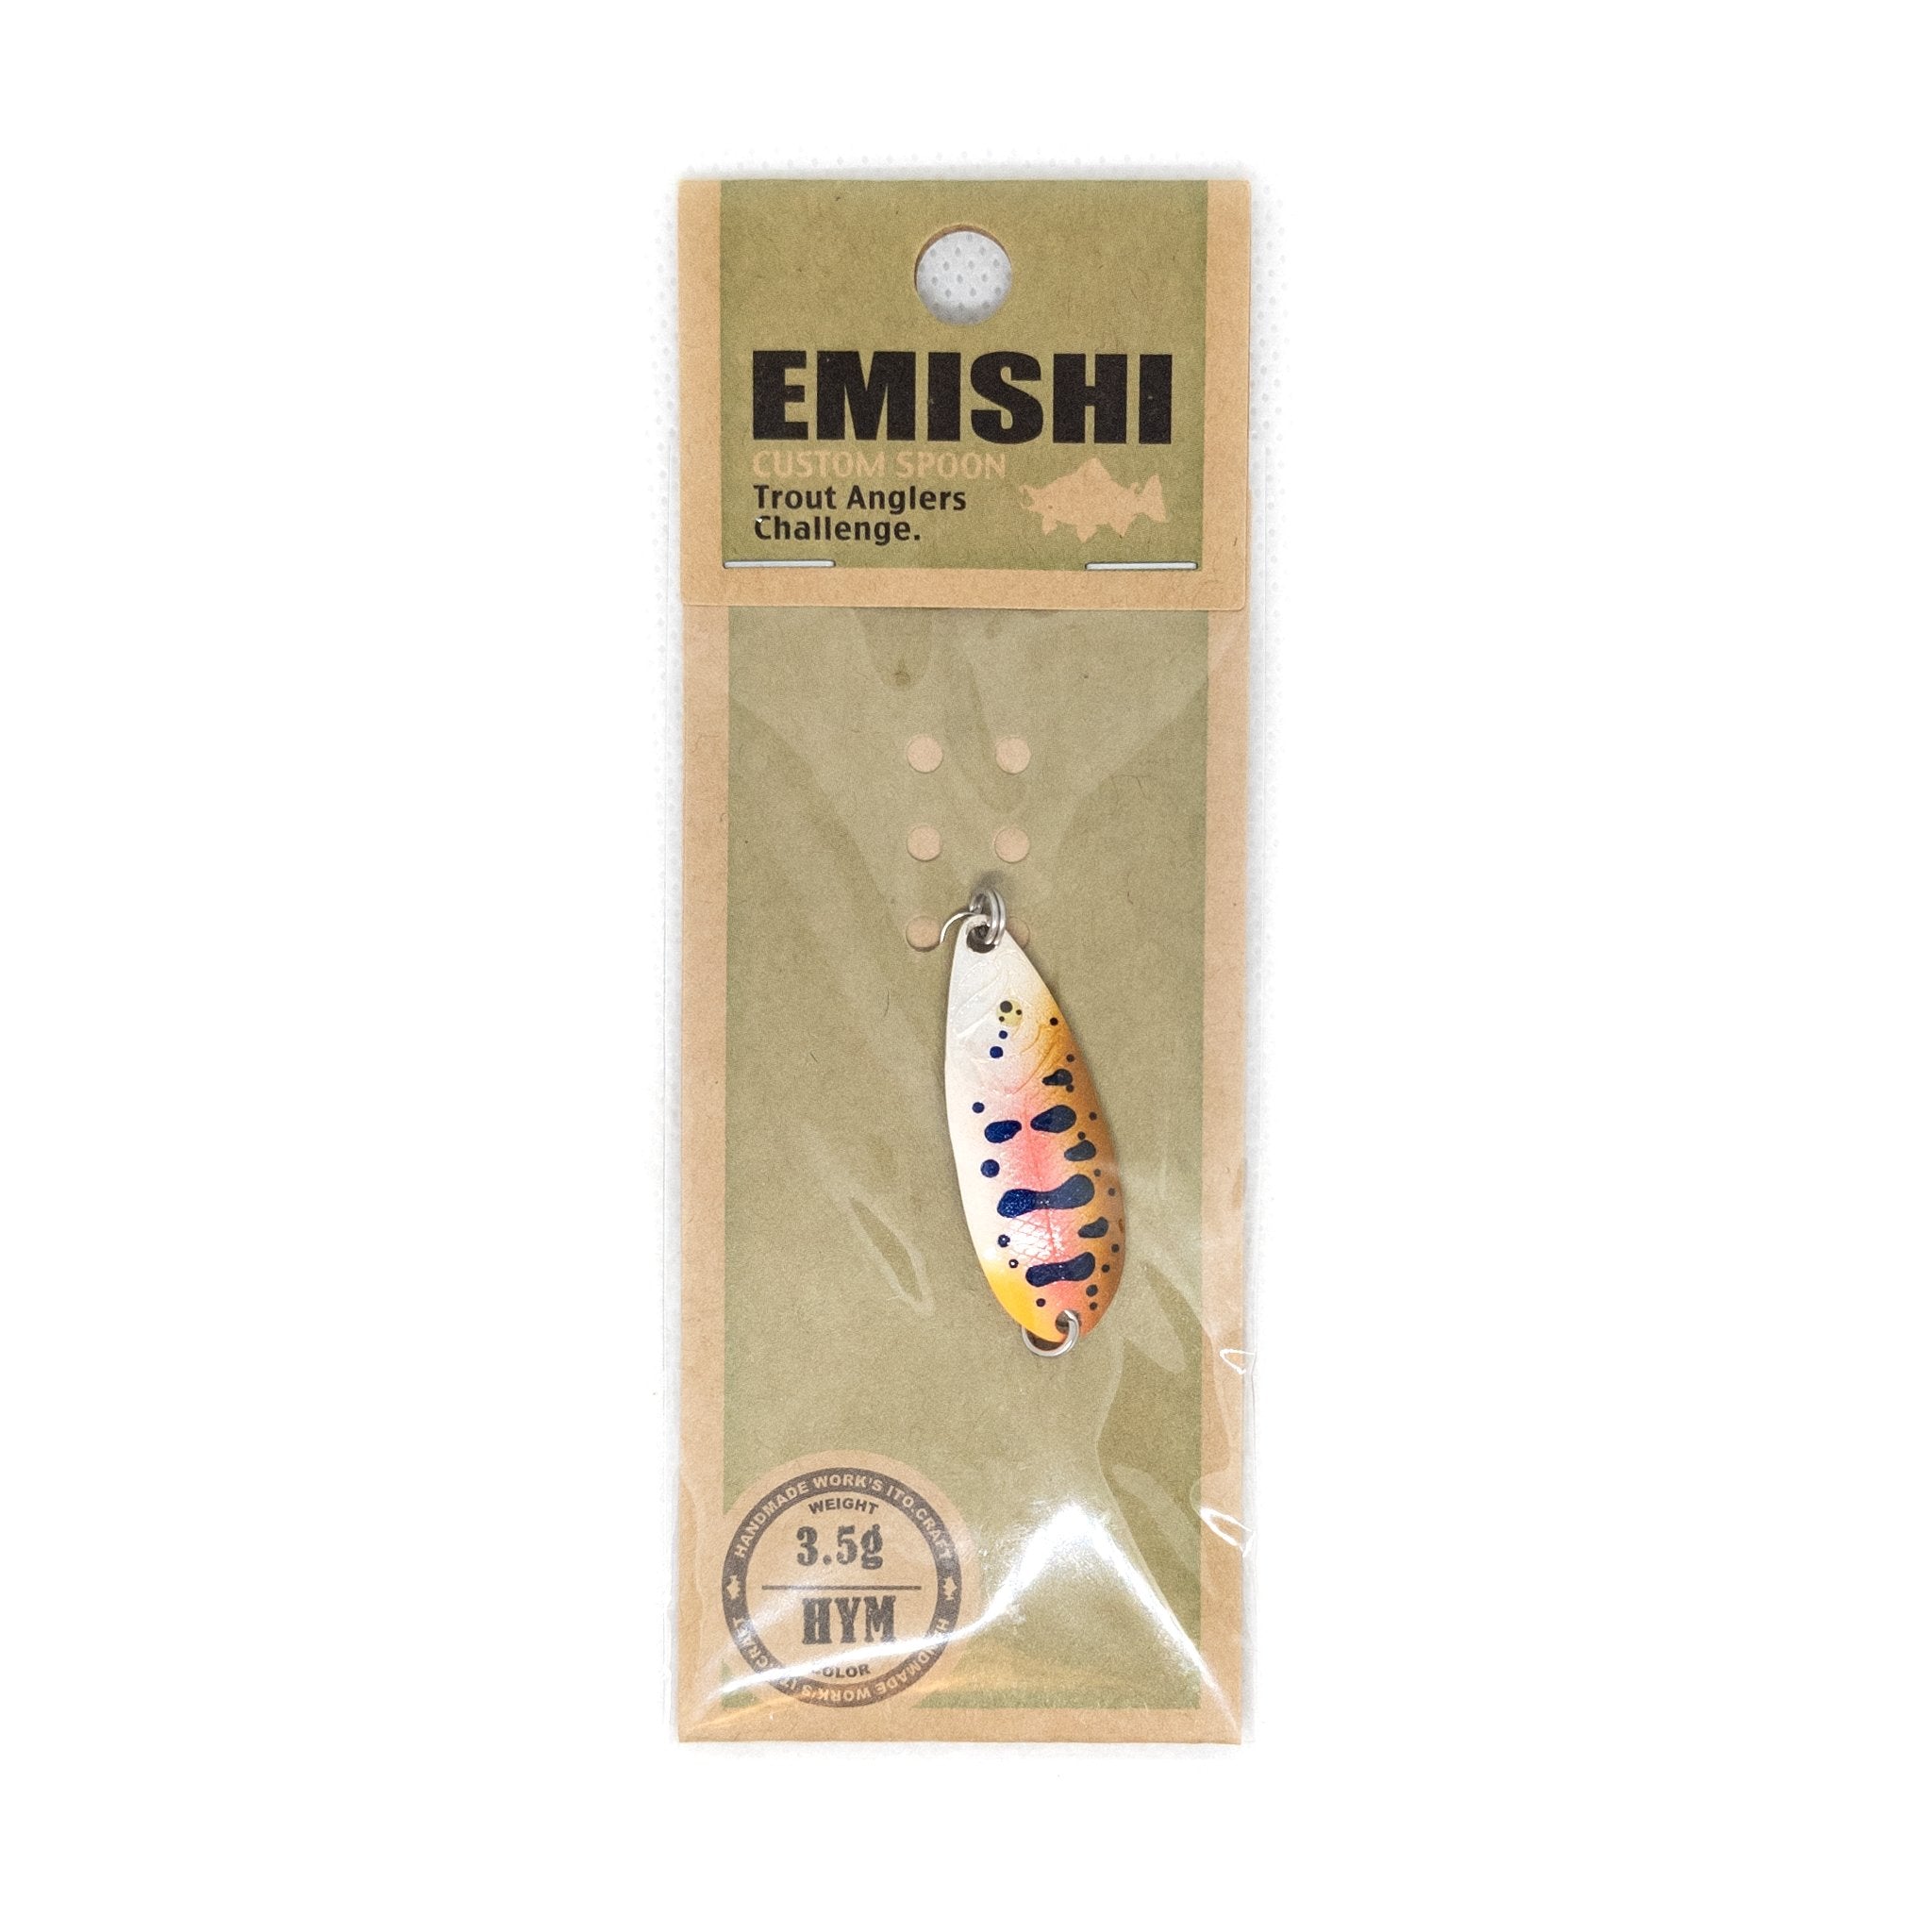 Emishi Spoon 37 3.5g Color "HYM" - The Borrowed Lure